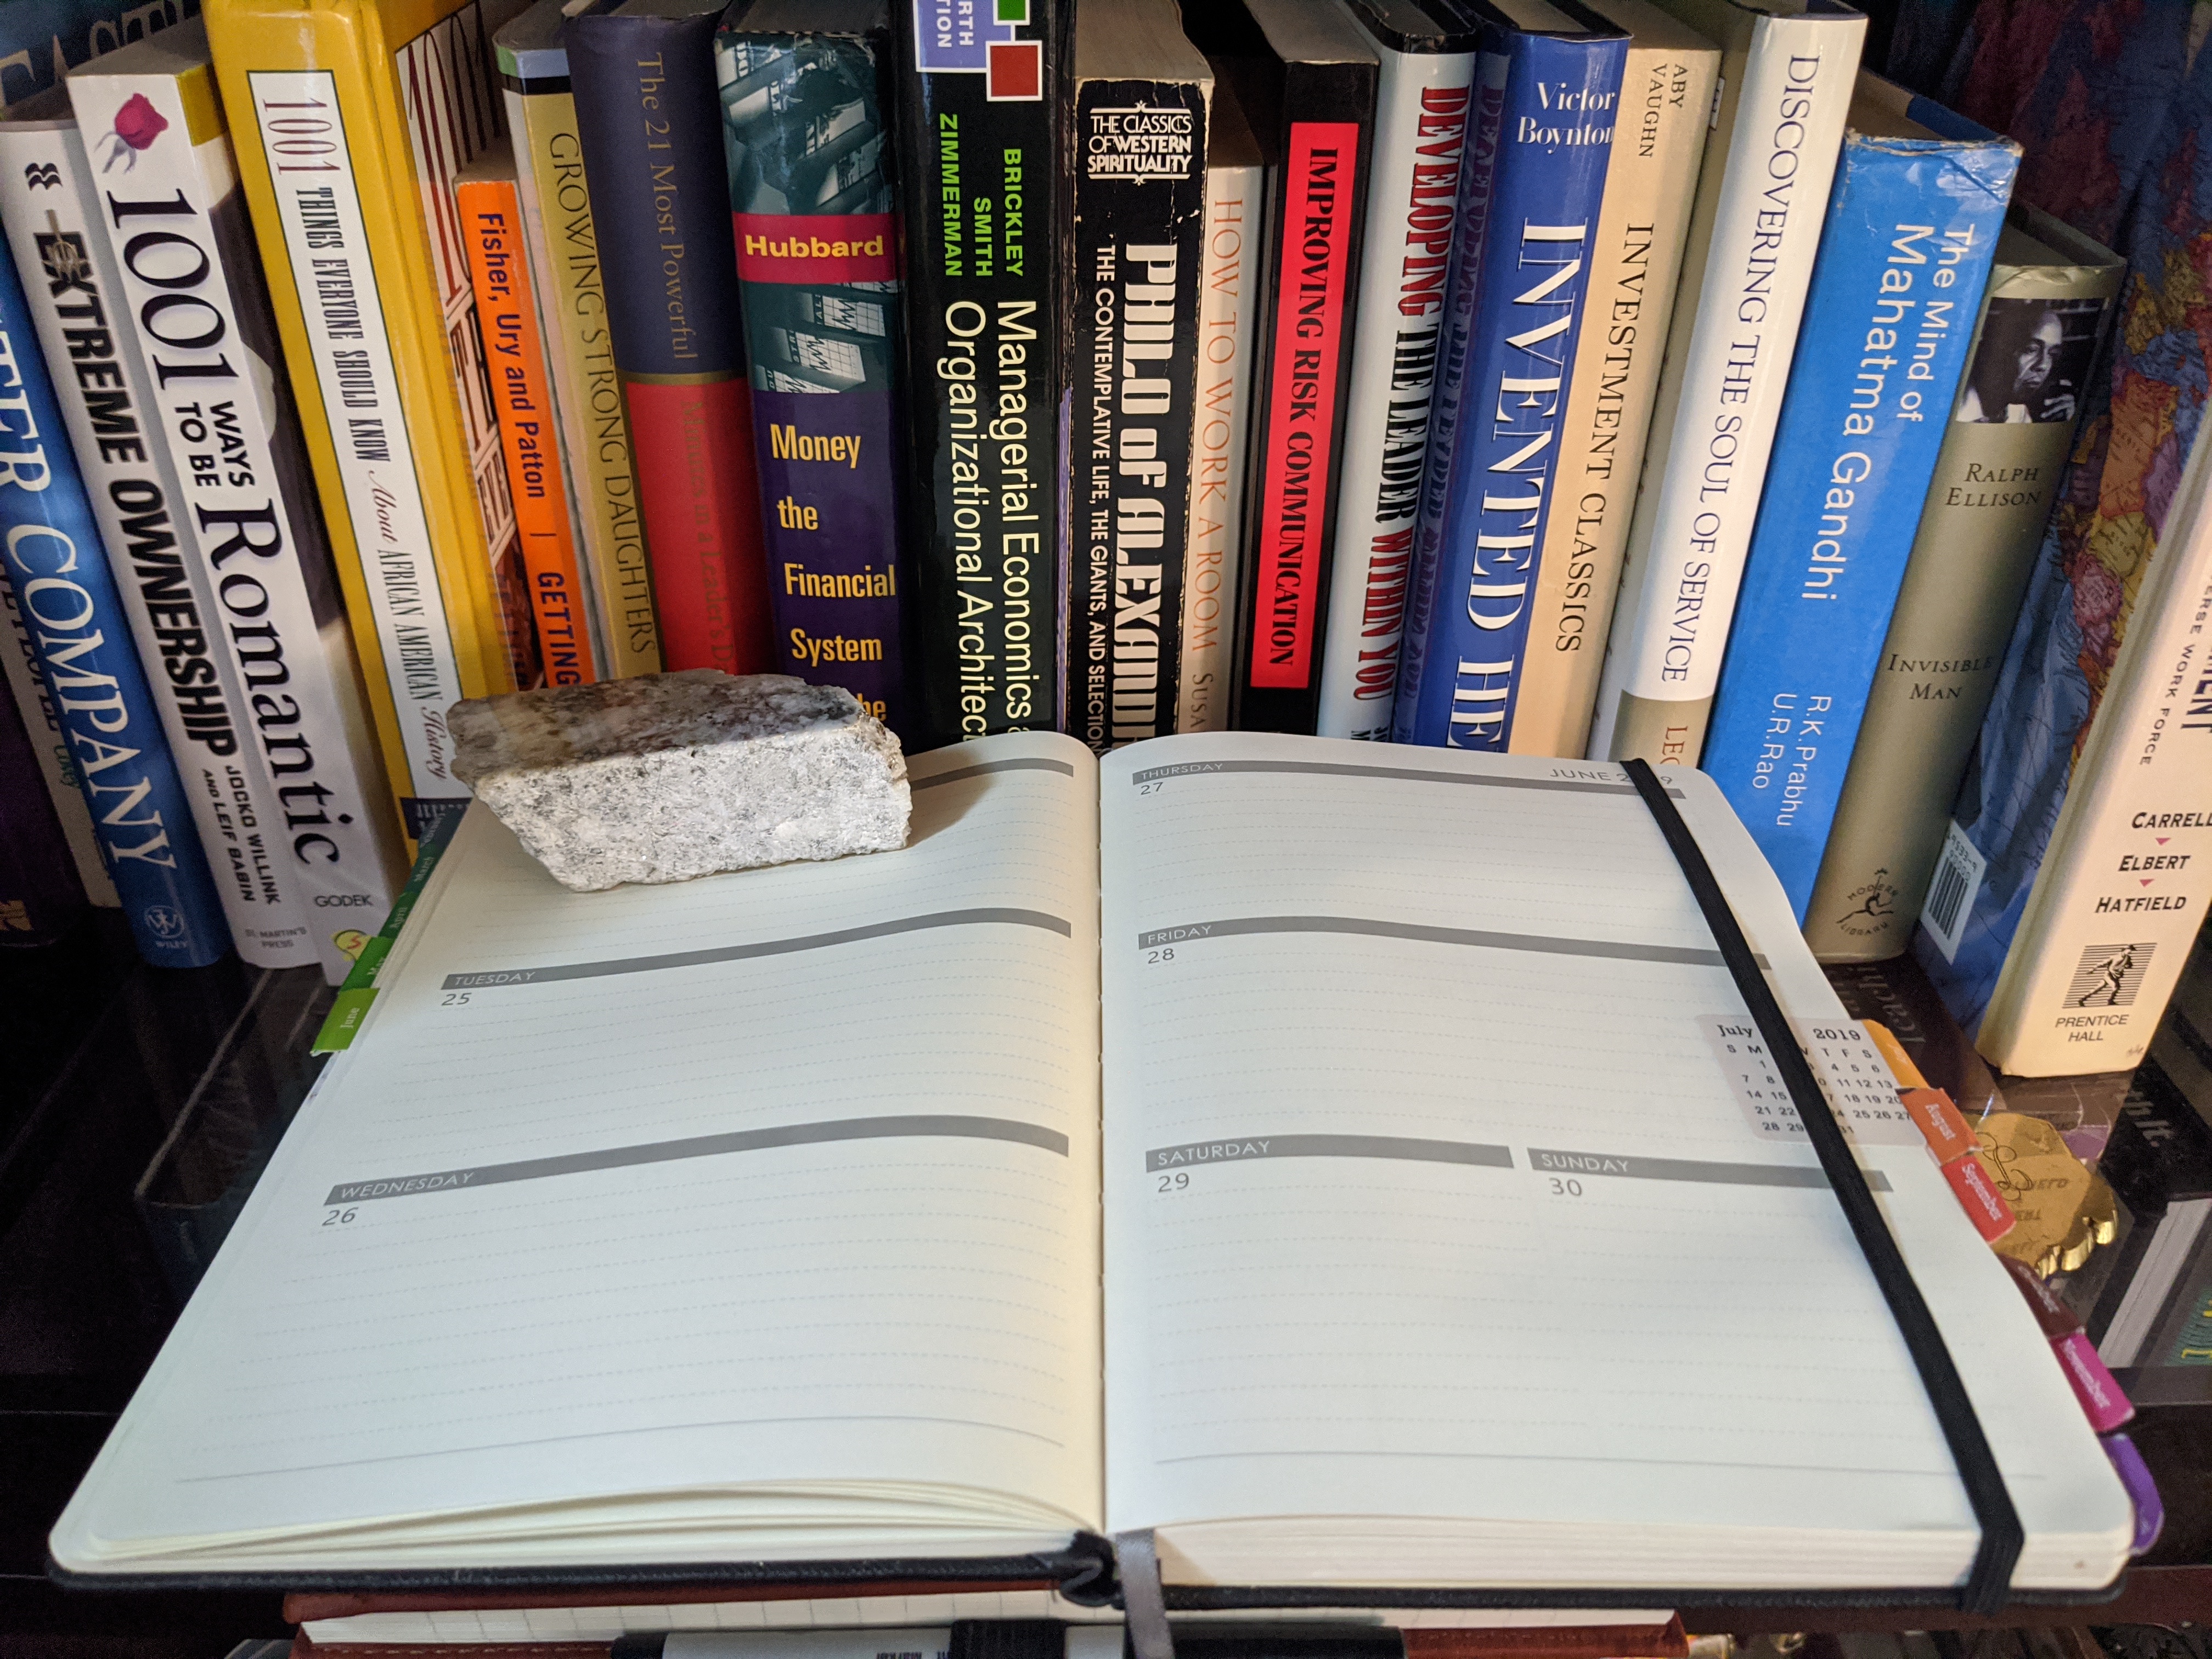 Despite not having a wire binding, this is what my favorite paper journal looks like open to a blank set of pages.